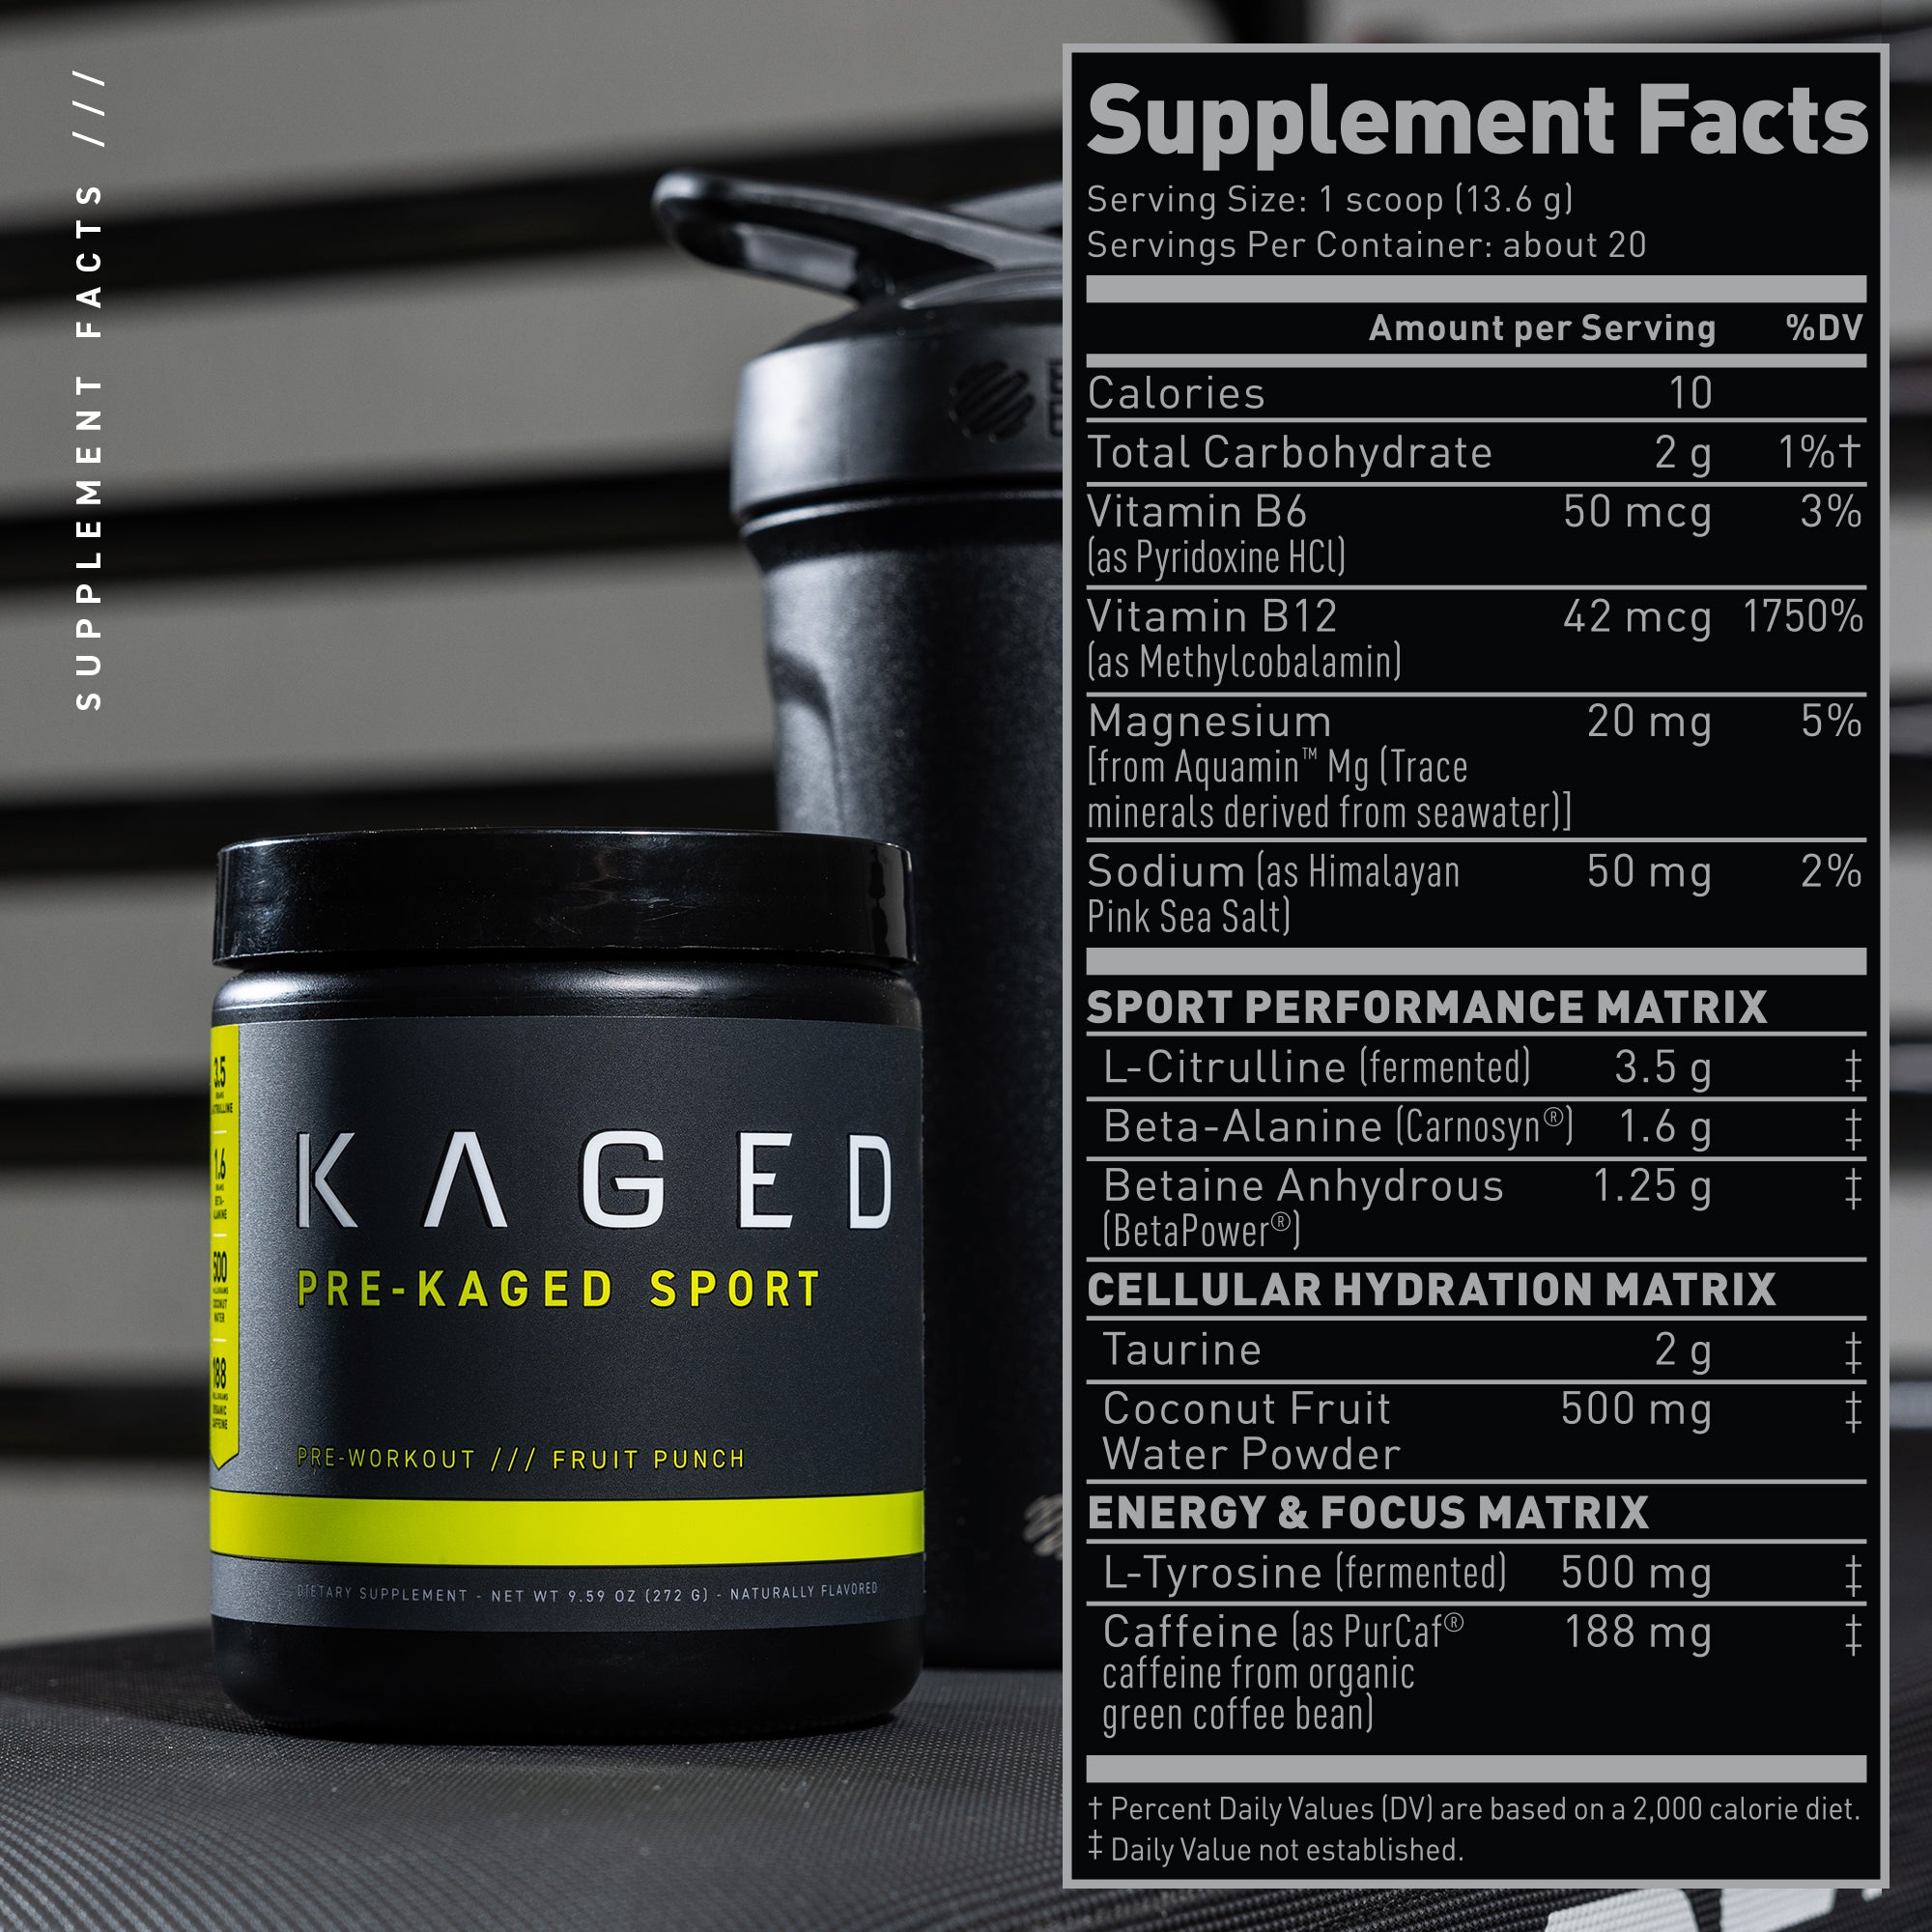 Kaged Pre-Kaged Sport Supplement Facts